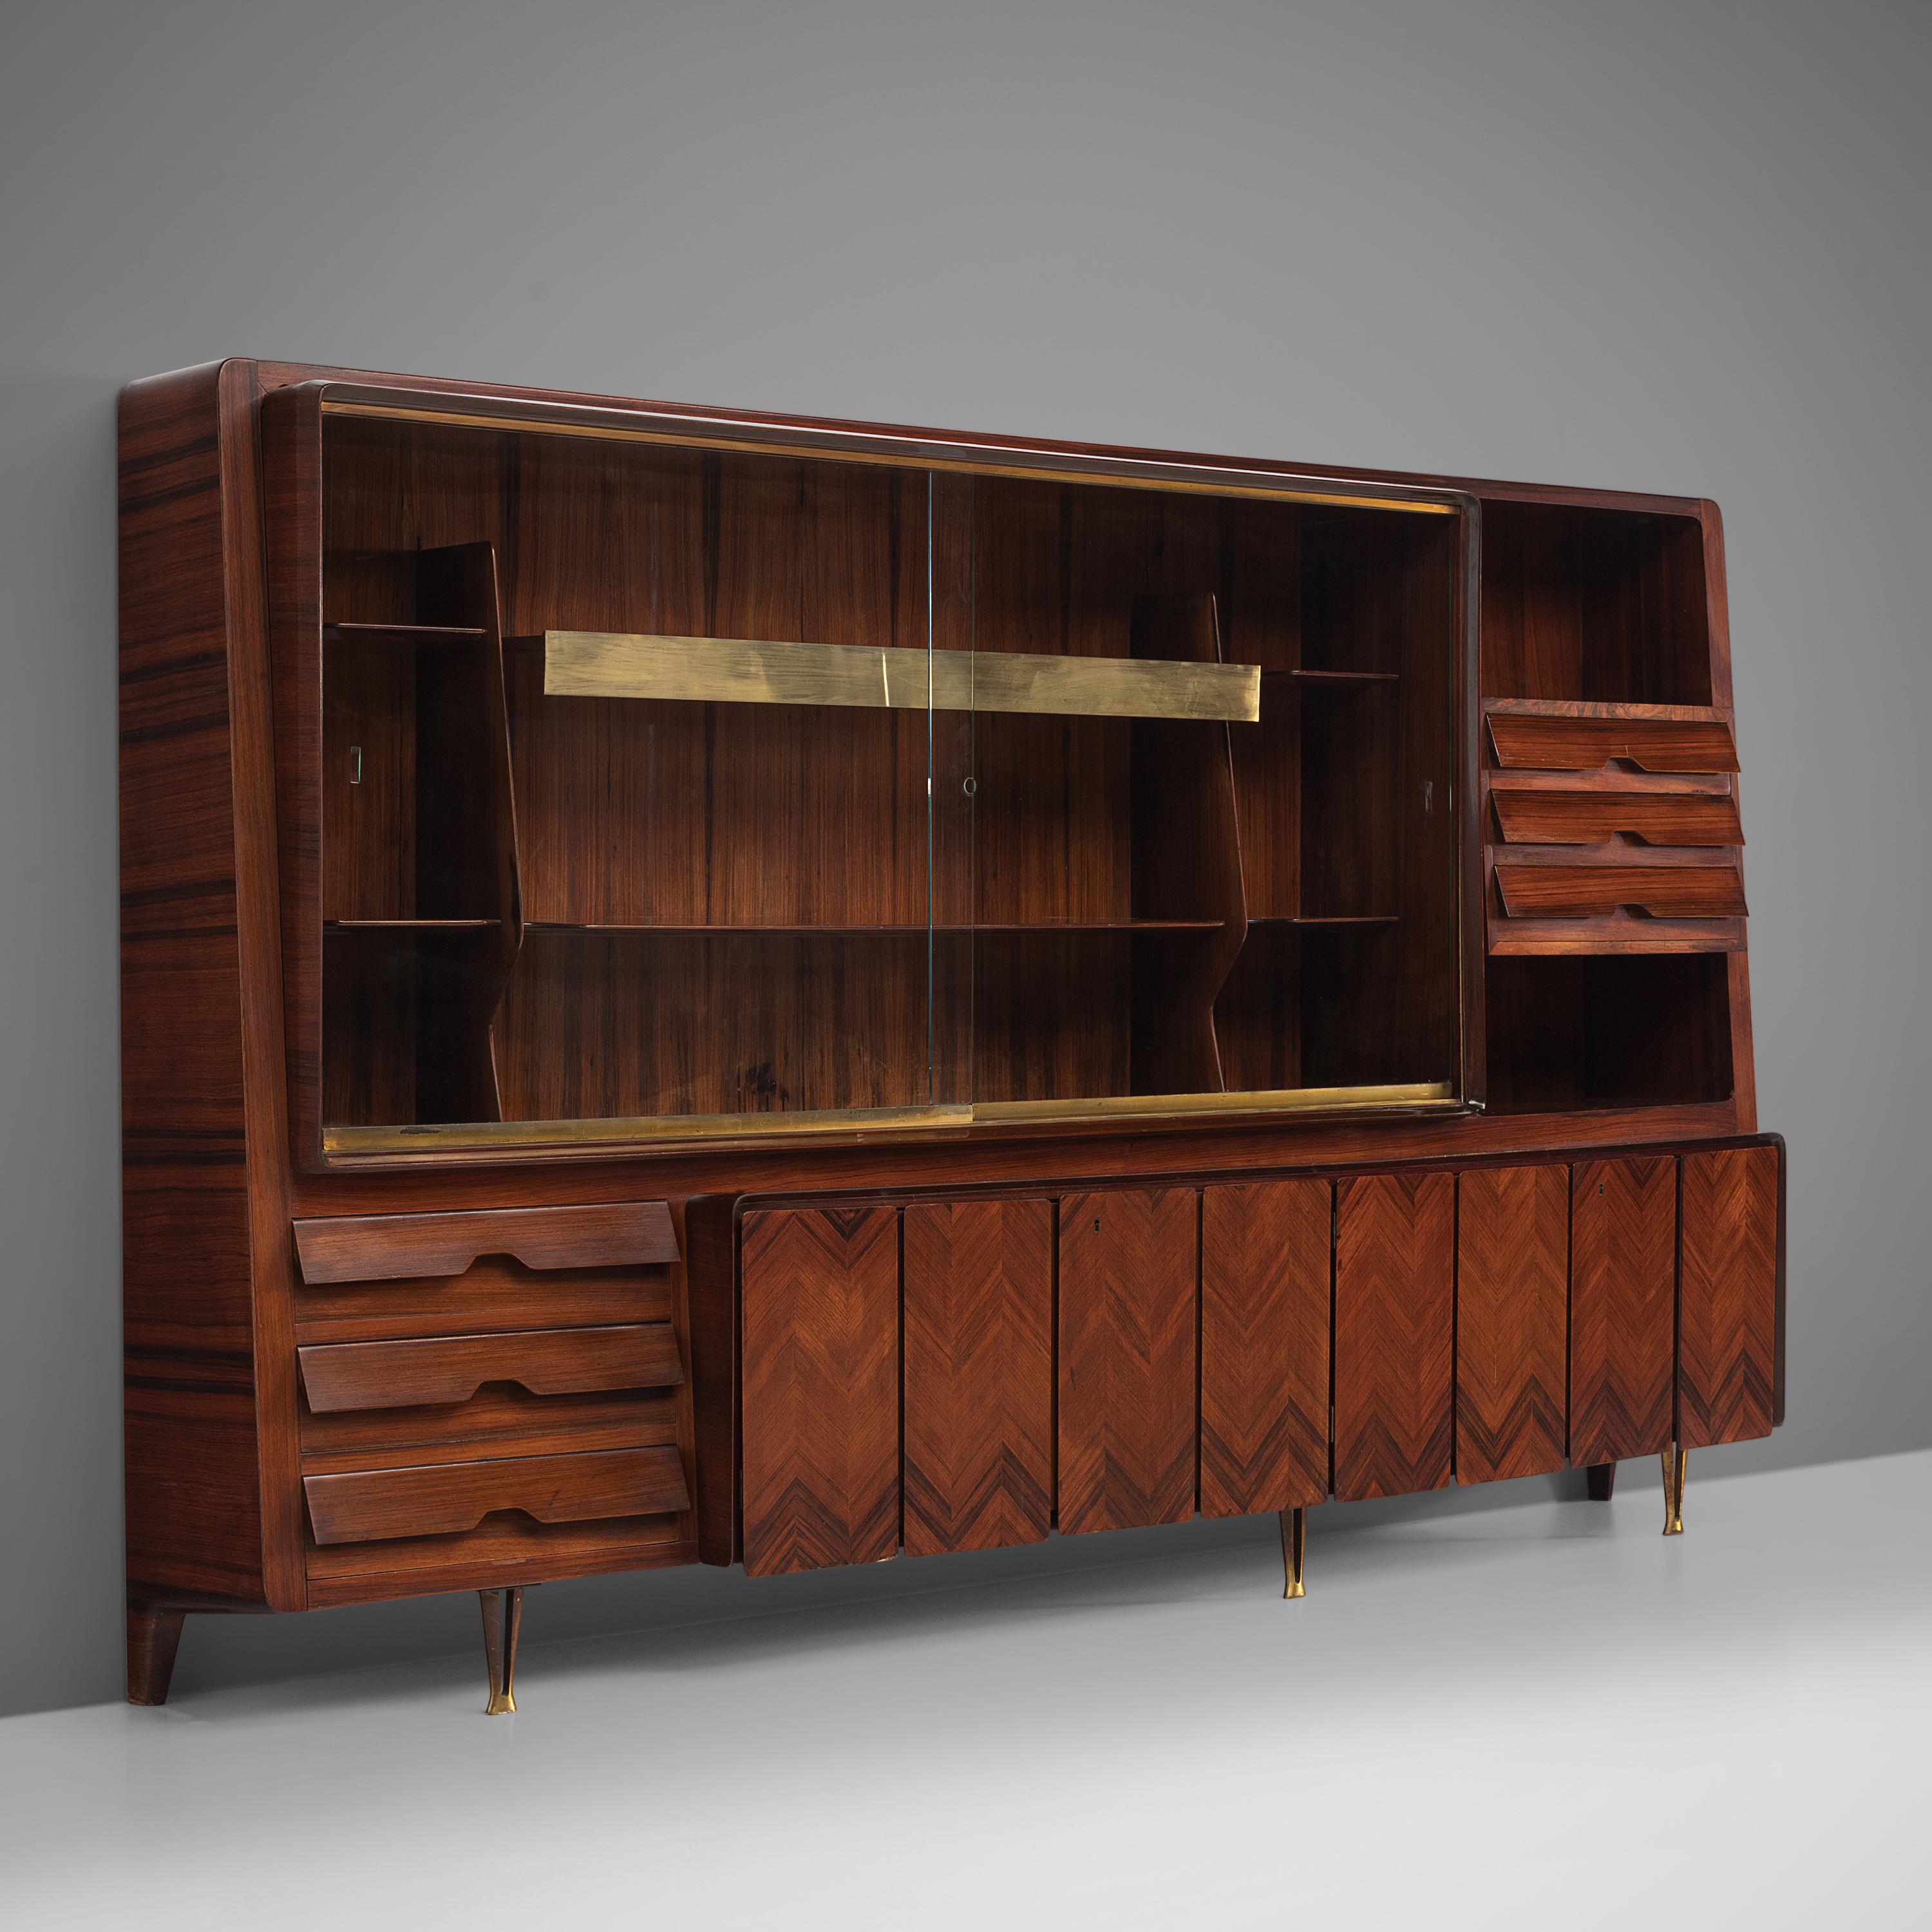 Dassi cabinet, wood, brass, Italy 1950s.

This Italian cabinet is highly elegant and refined. The brass panels, handles and patterned doors are all exquisitely produced. There are closed compartments such as drawers and doors and there are two